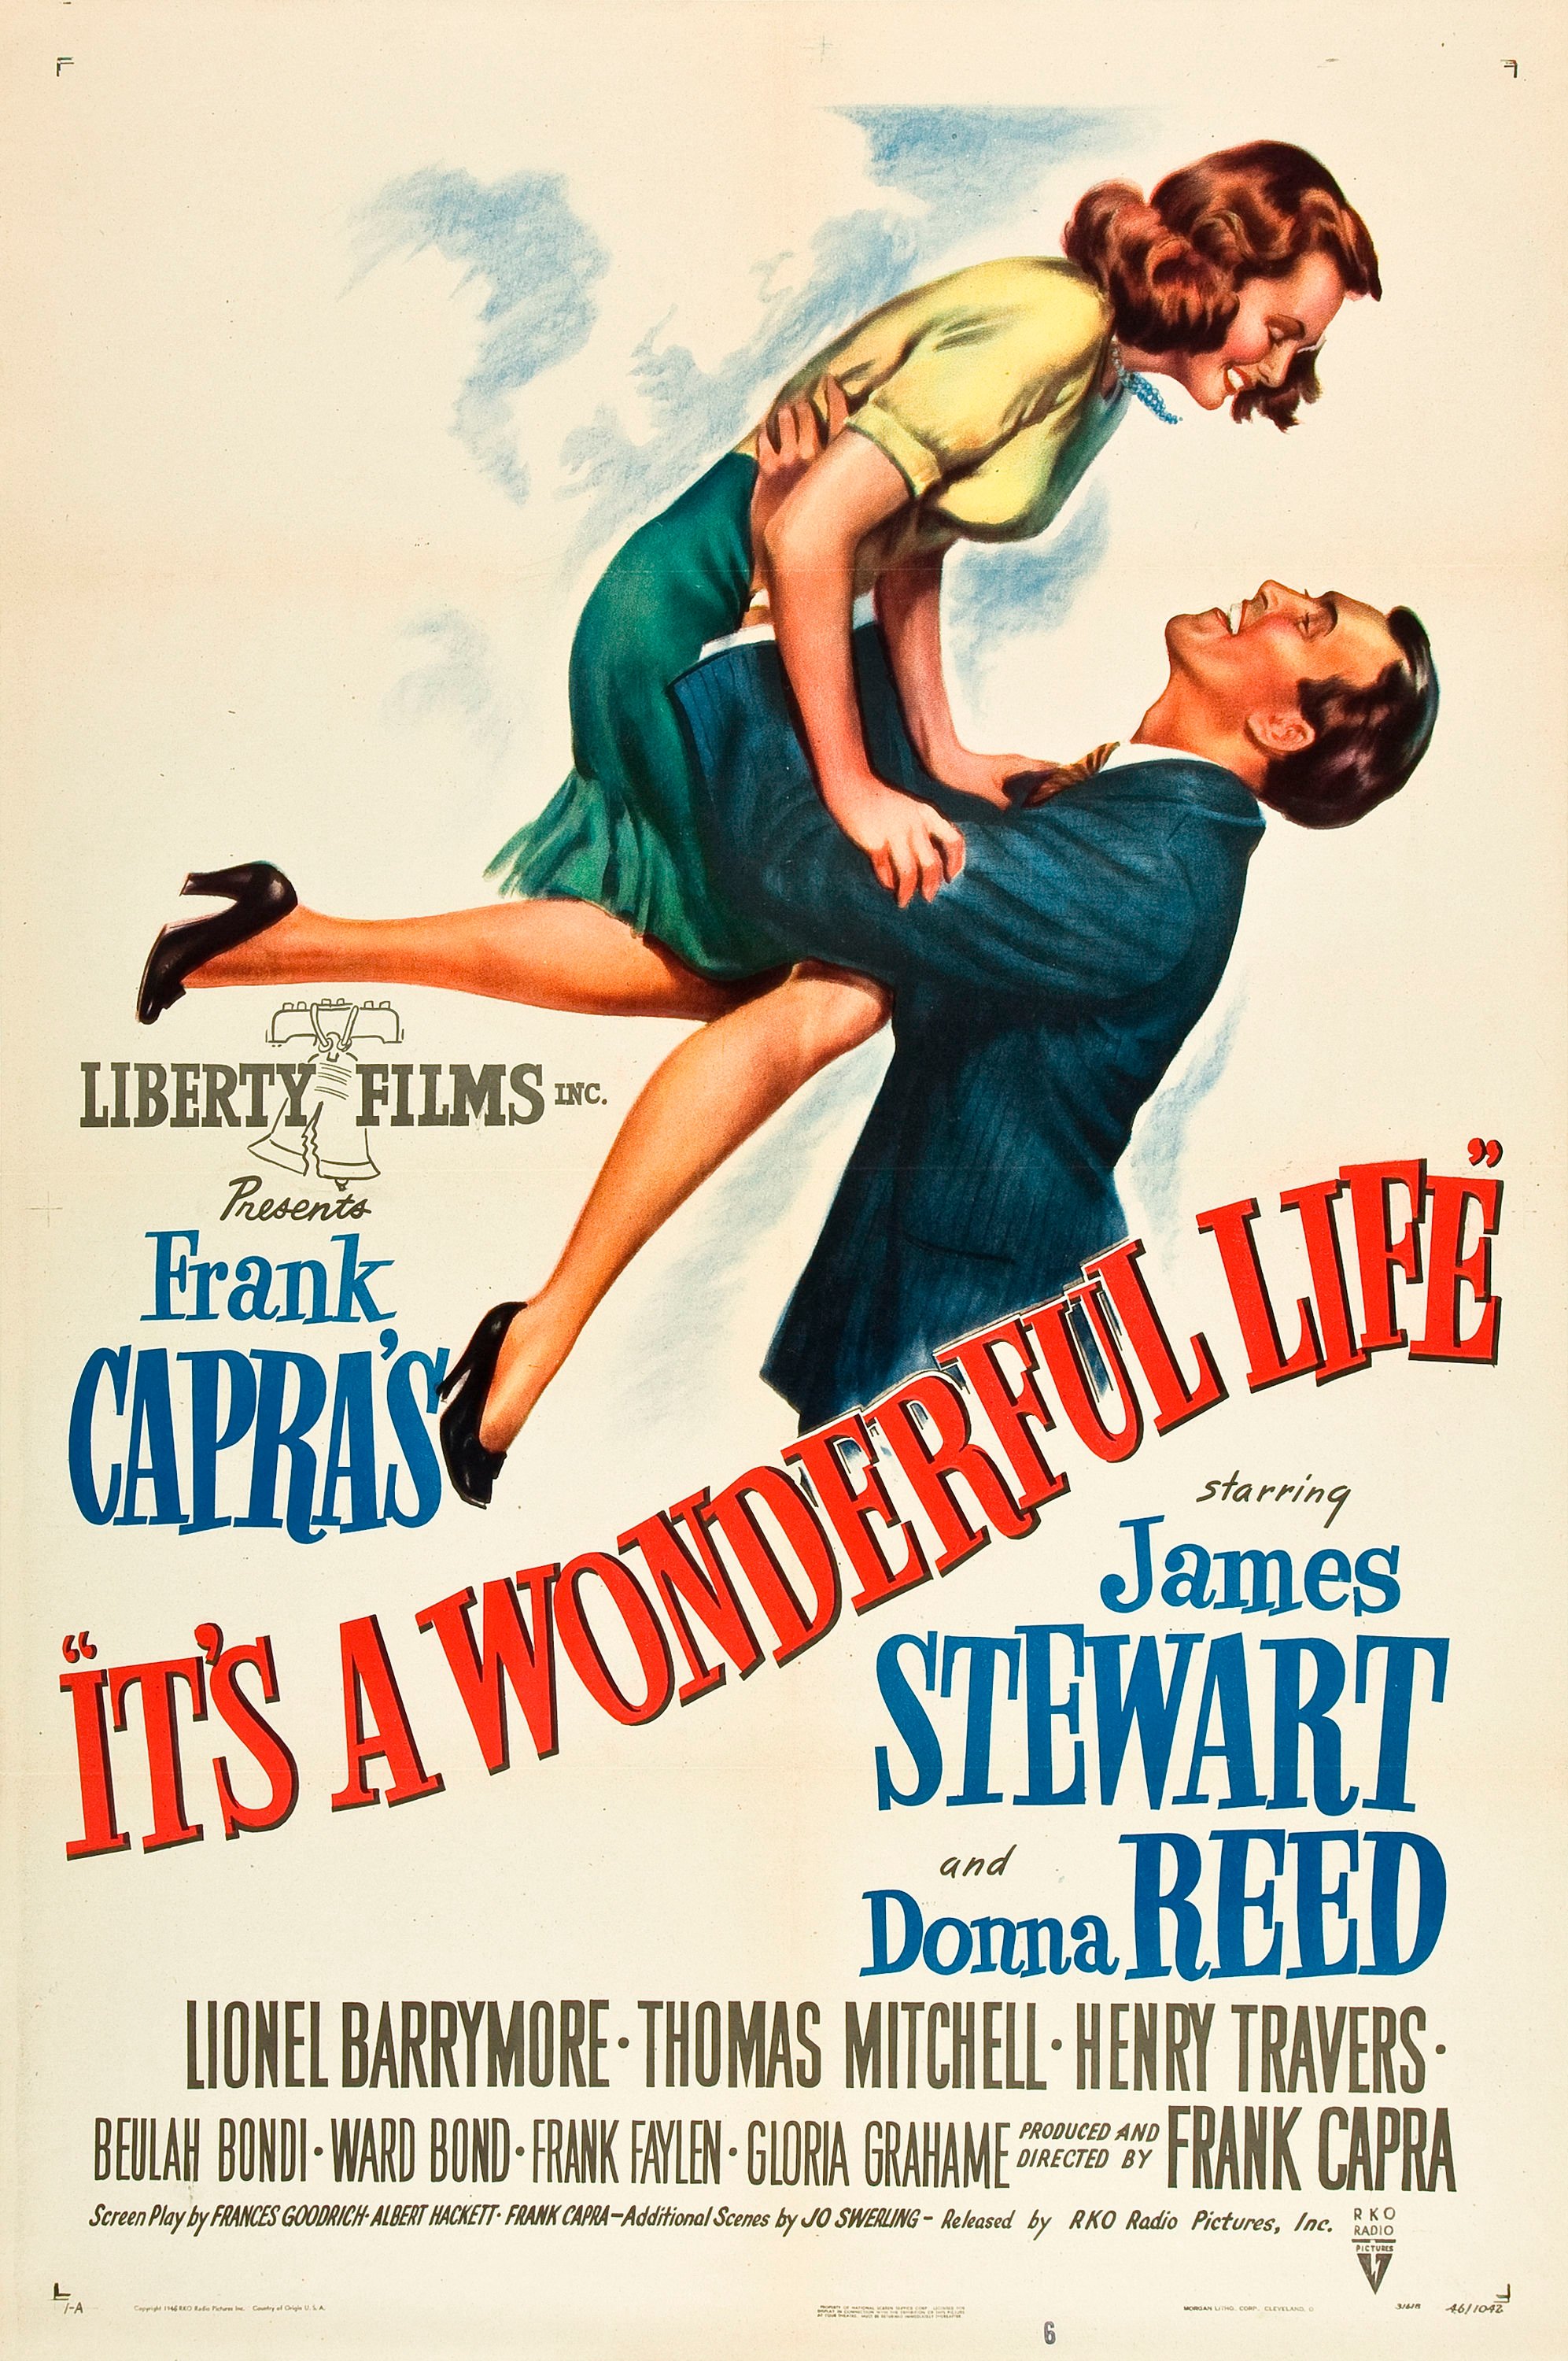 The poster for "It's a Wonderful Life"